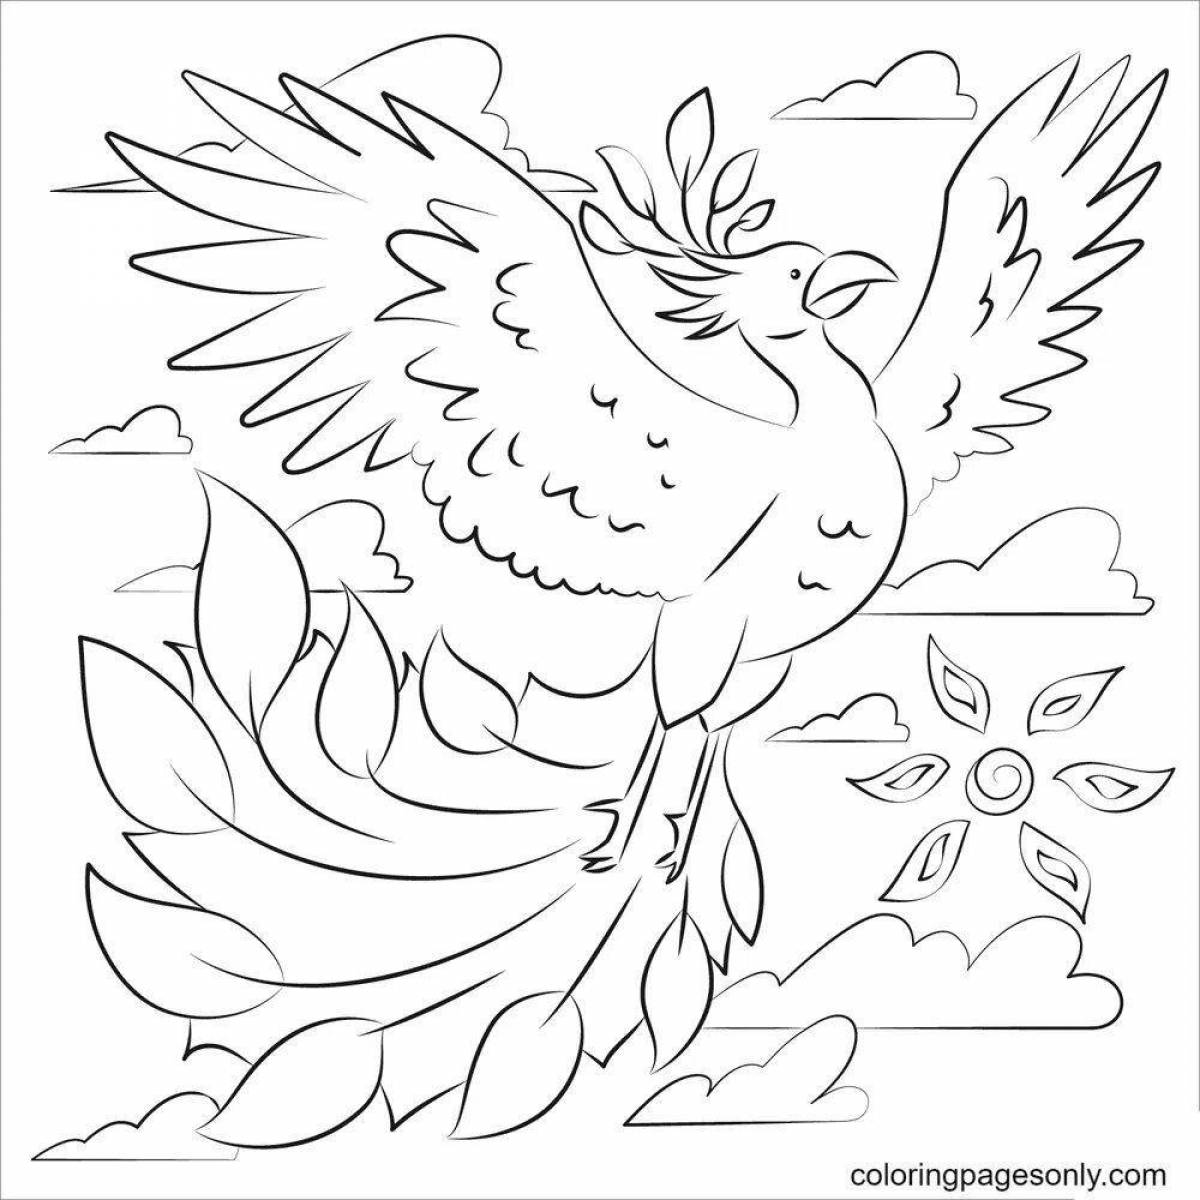 Beautifully colored phoenix coloring page